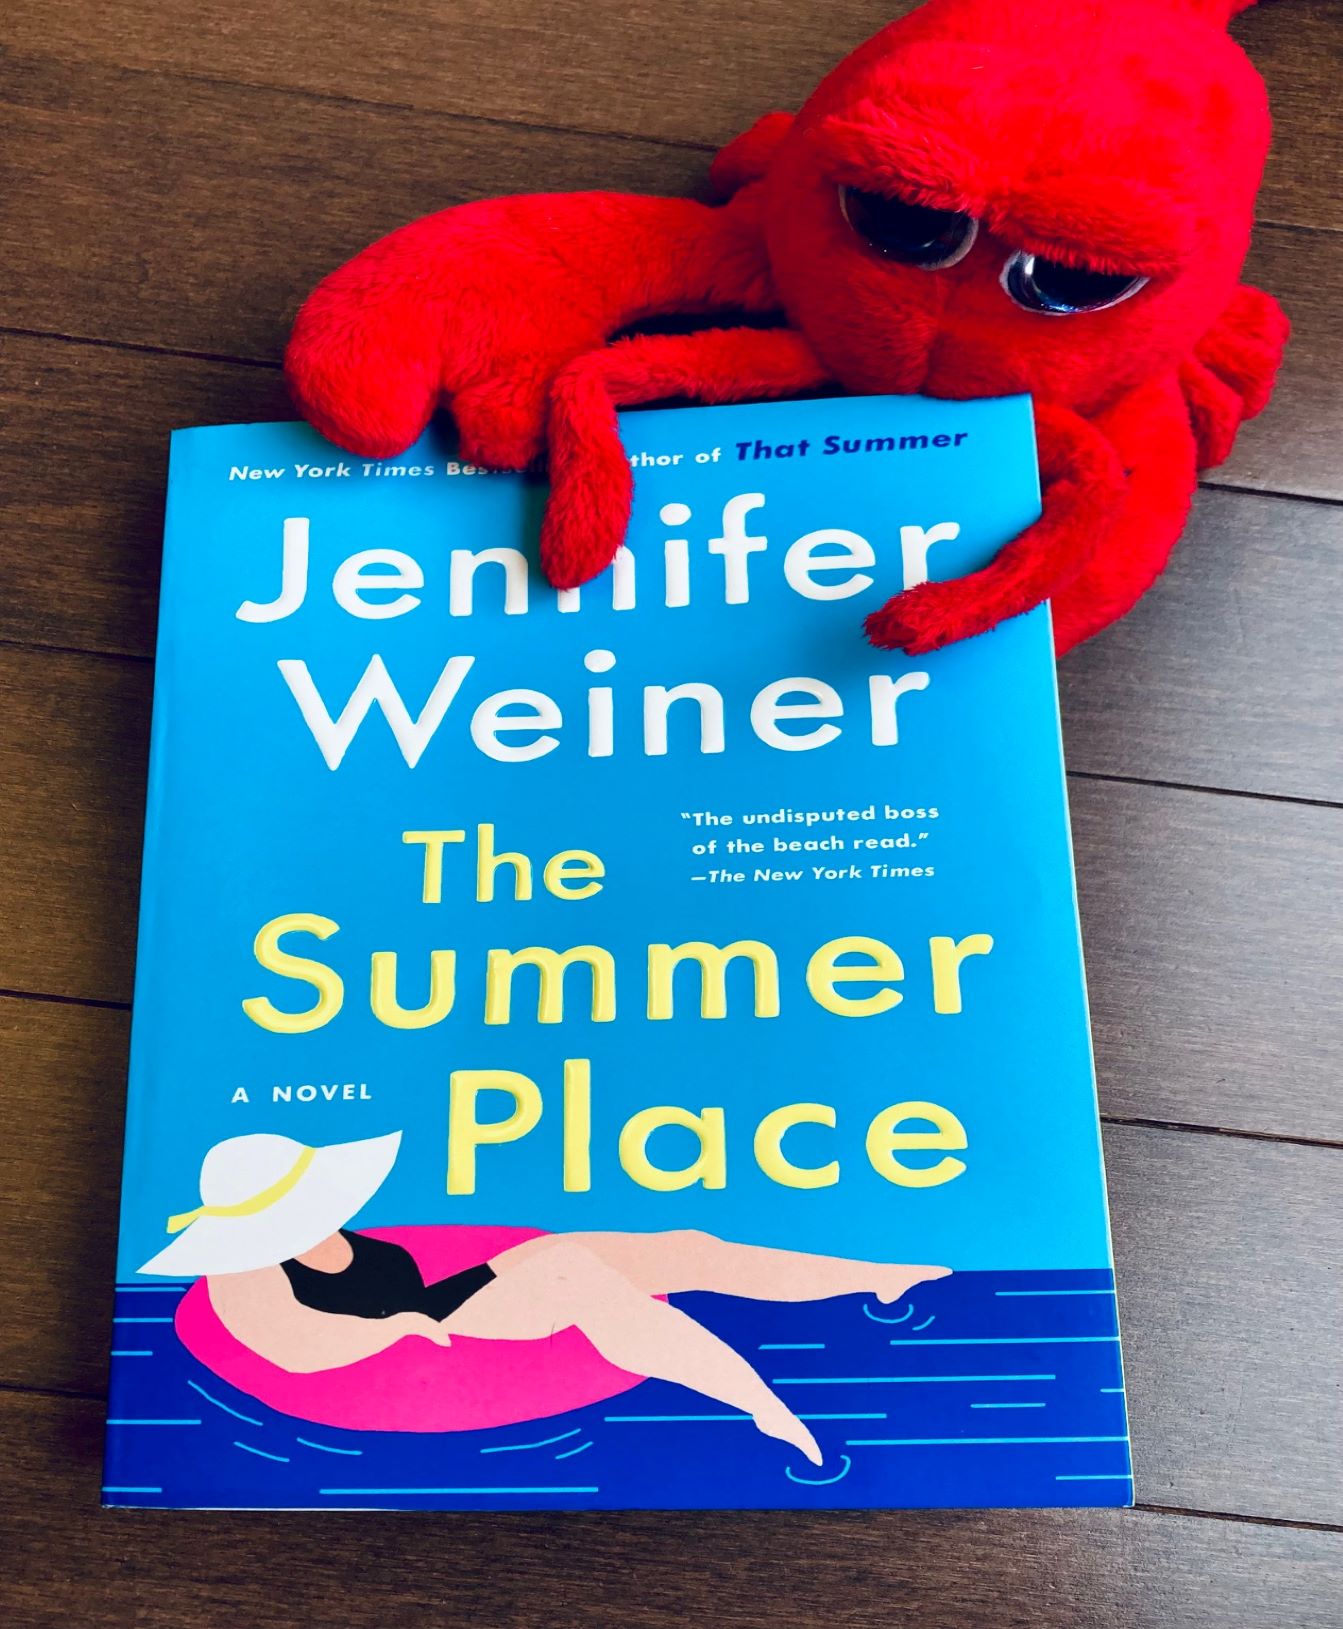 The Summer Place by Jennifer Weiner book with a stuffed crab